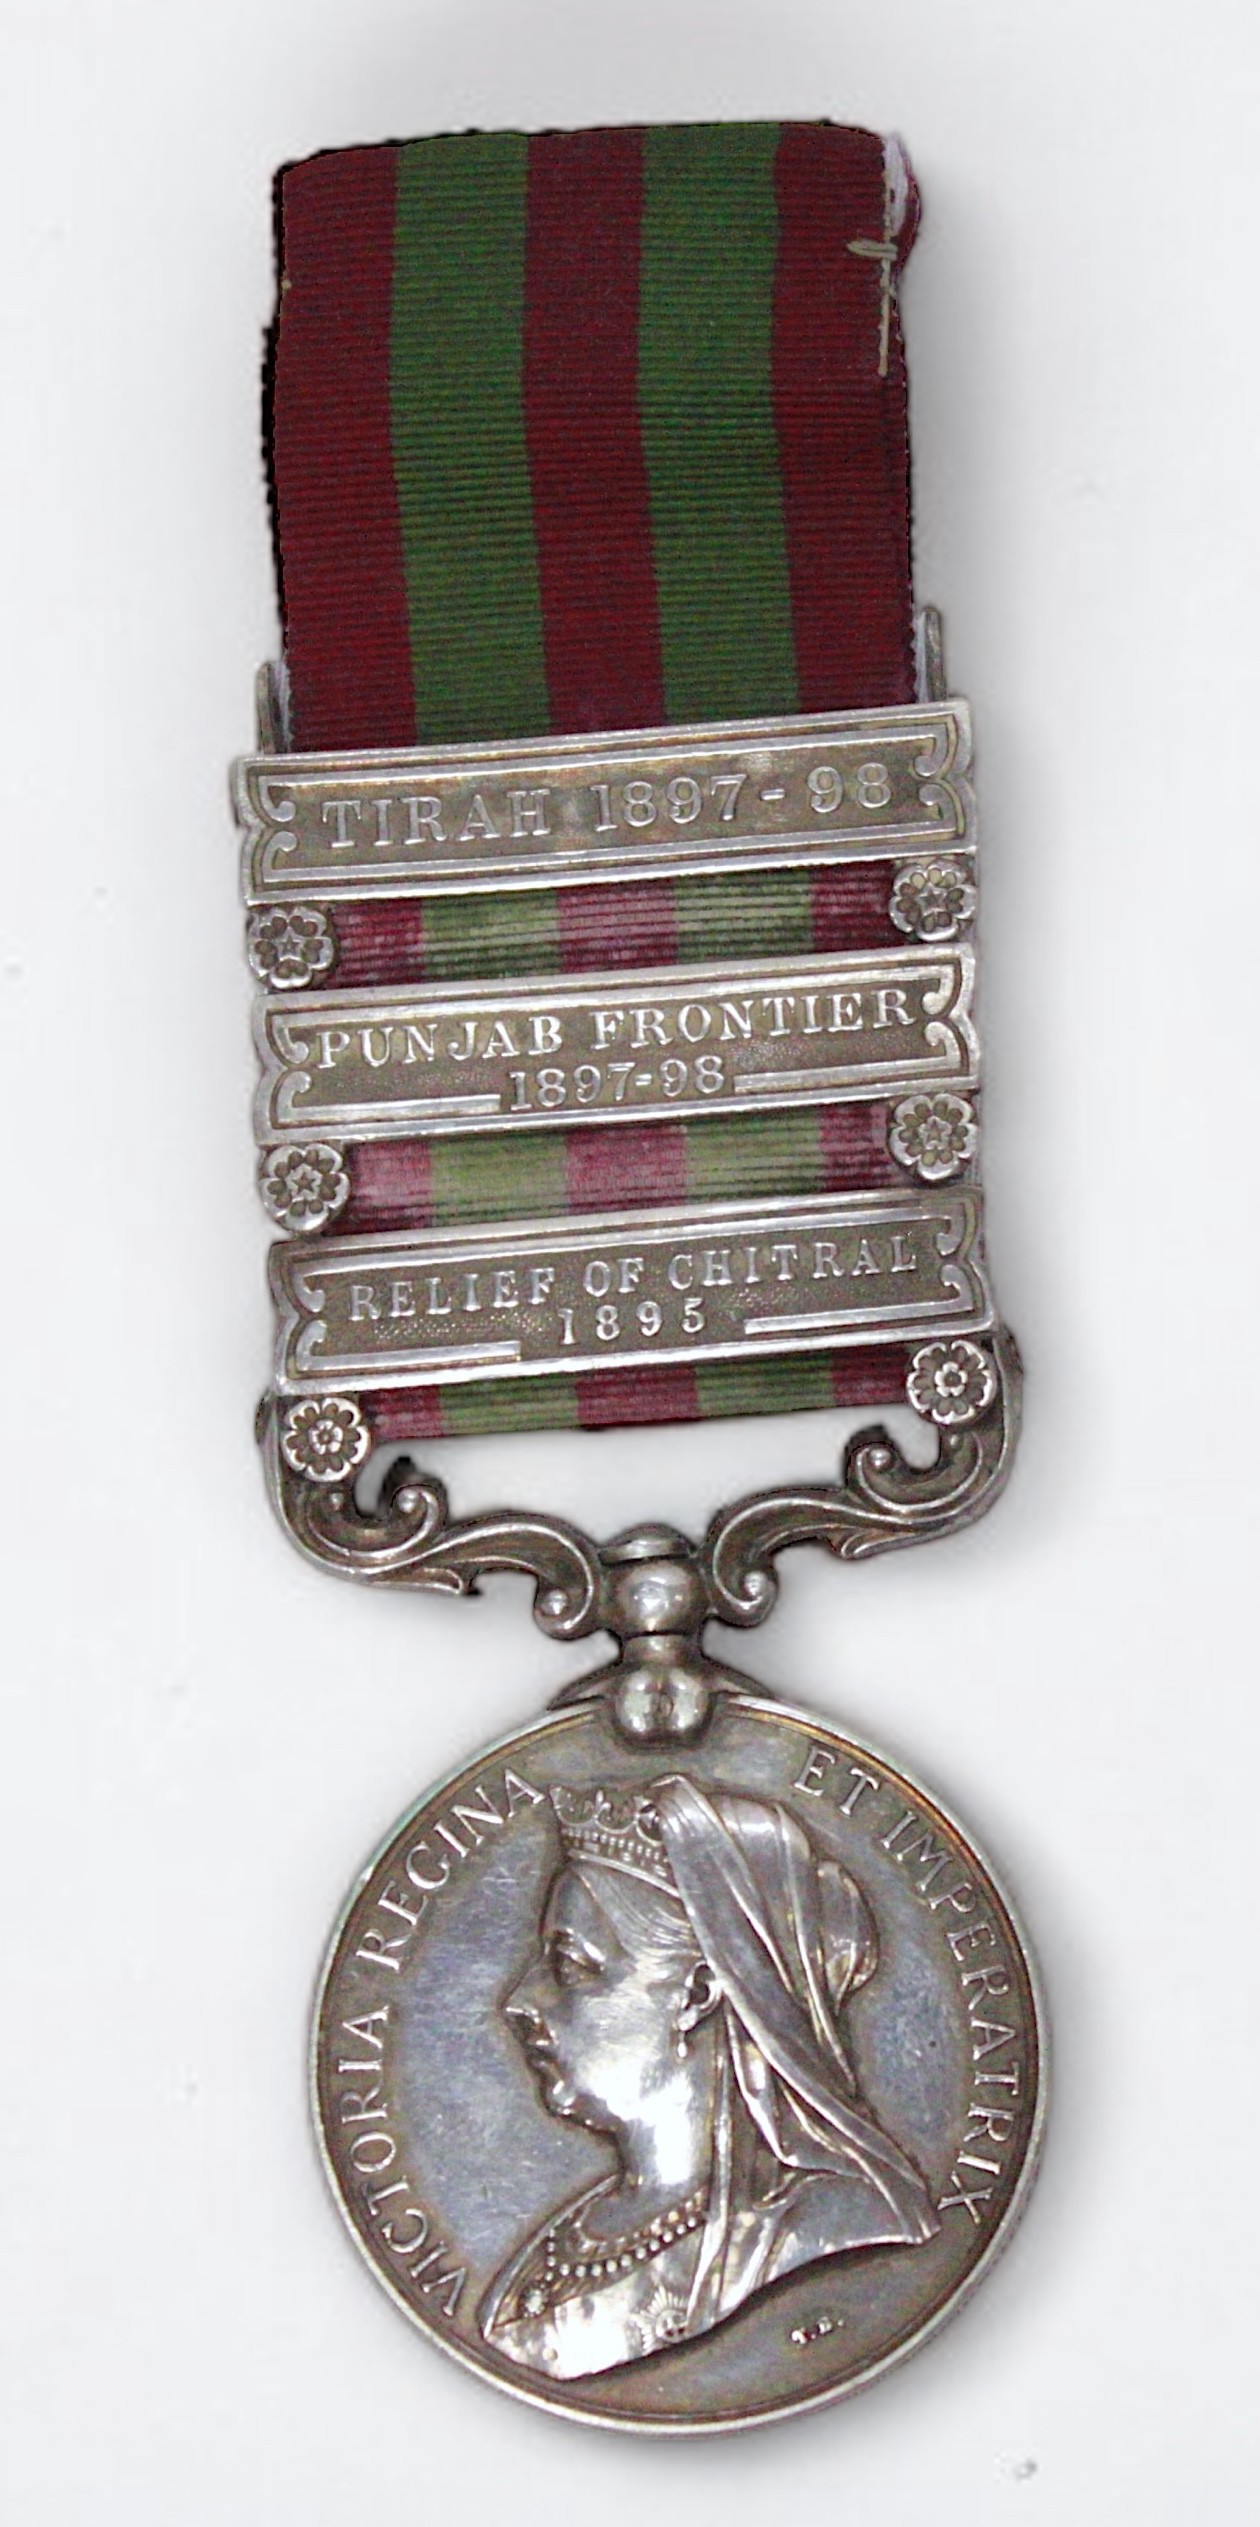 A QUEEN VICTORIA INDIA MEDAL 1896, with clasps for Relief of Chitral 1895, Punjab Frontier 1897-98